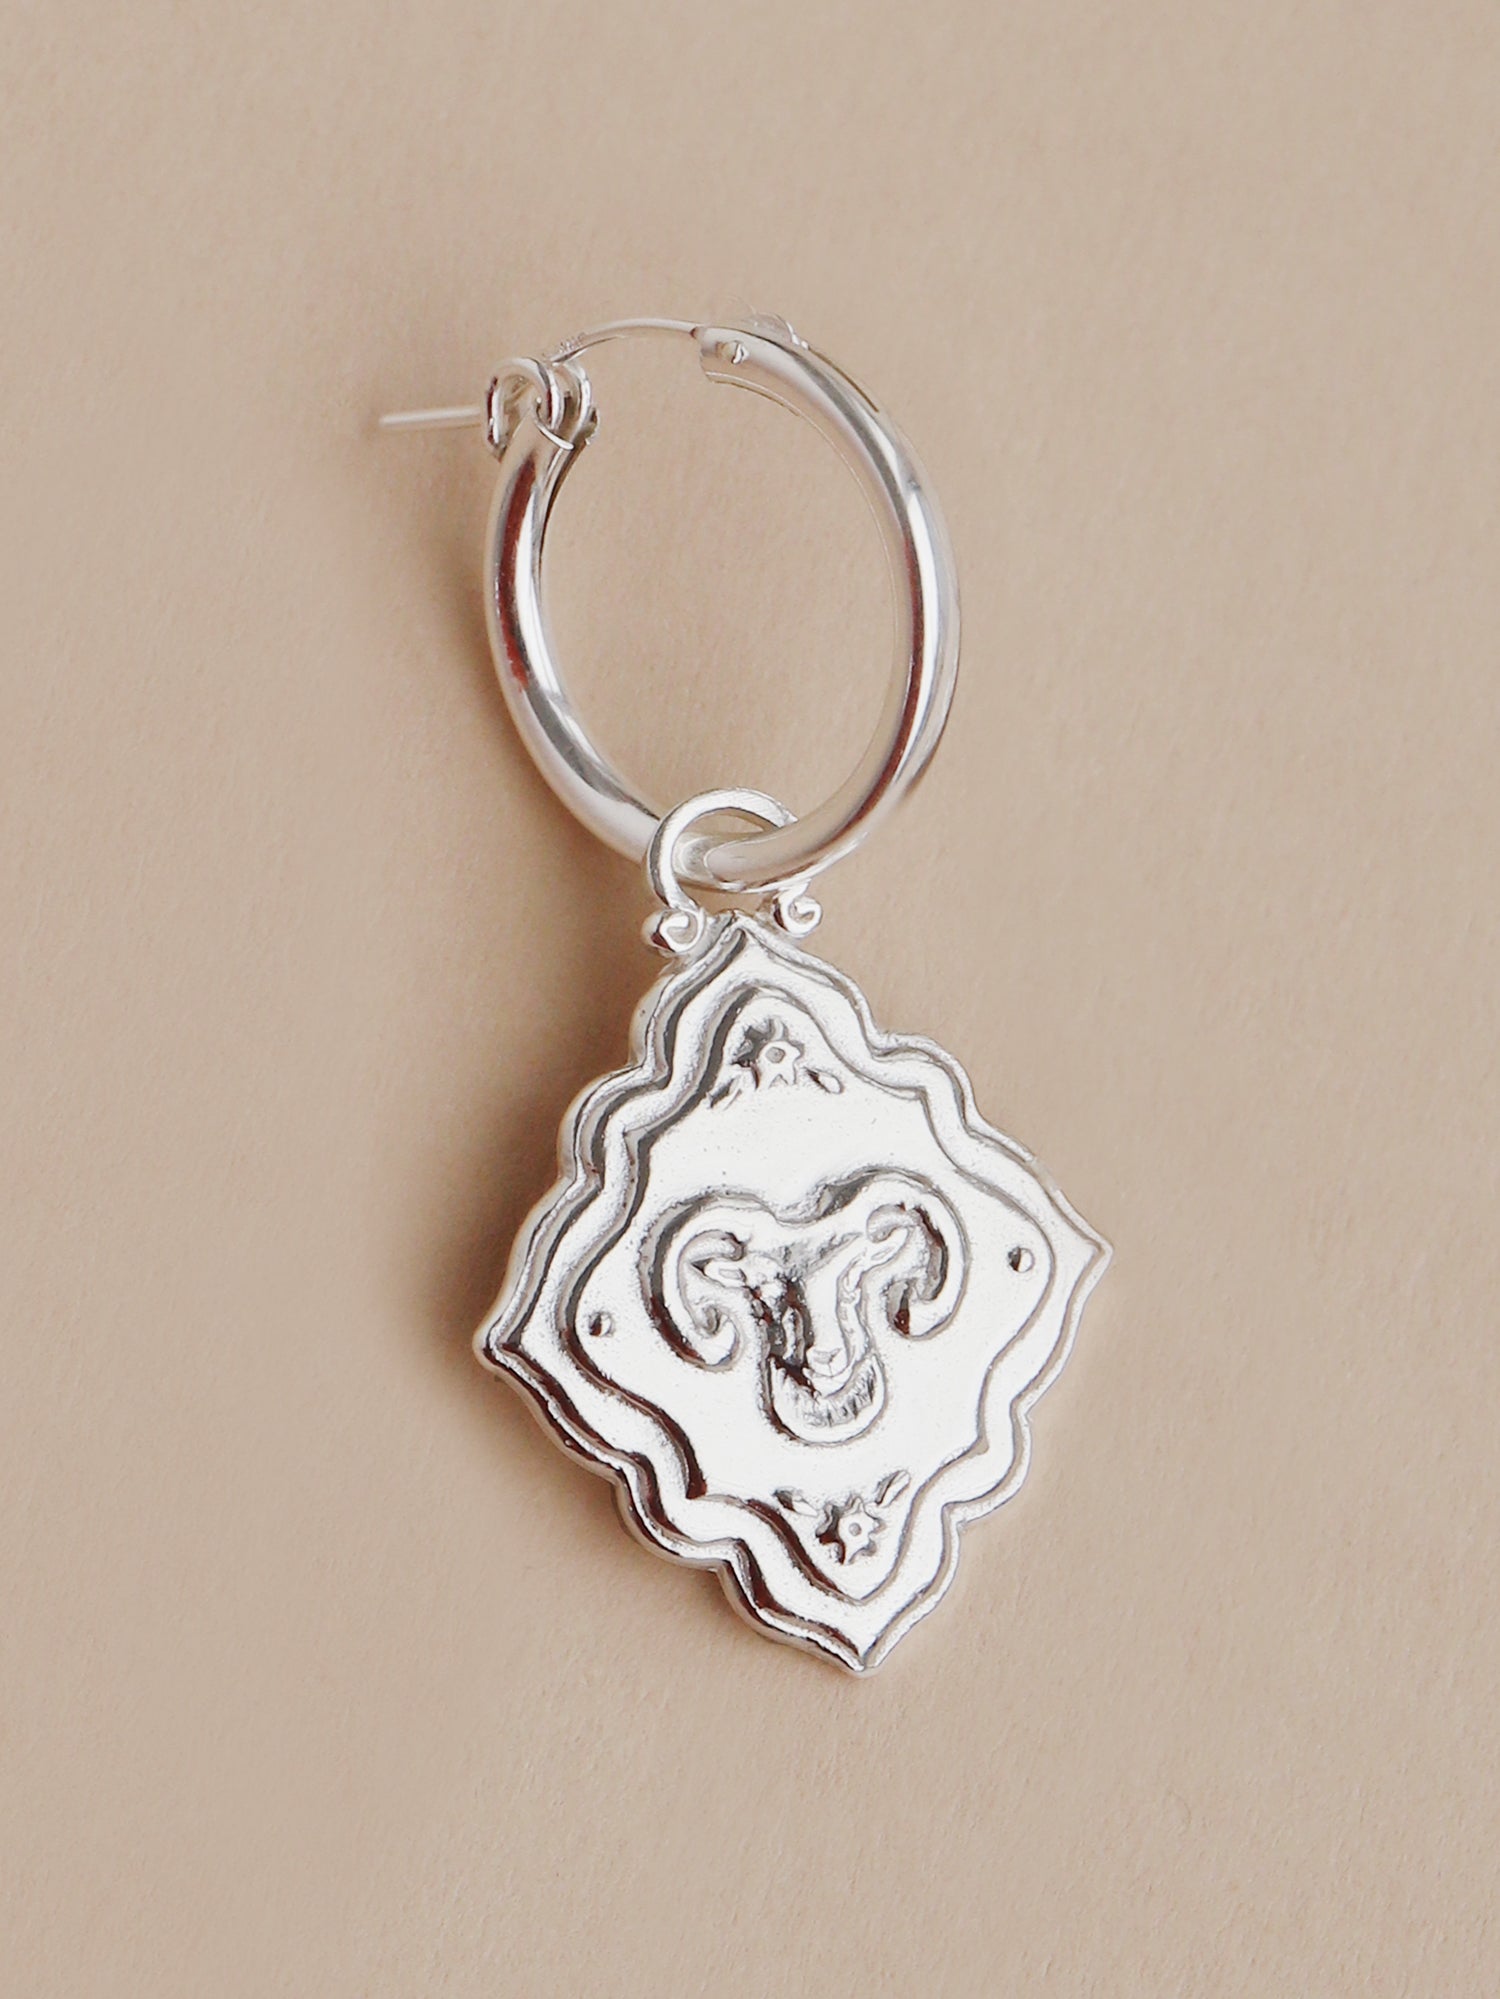 Aries - Individual Charm in Silver